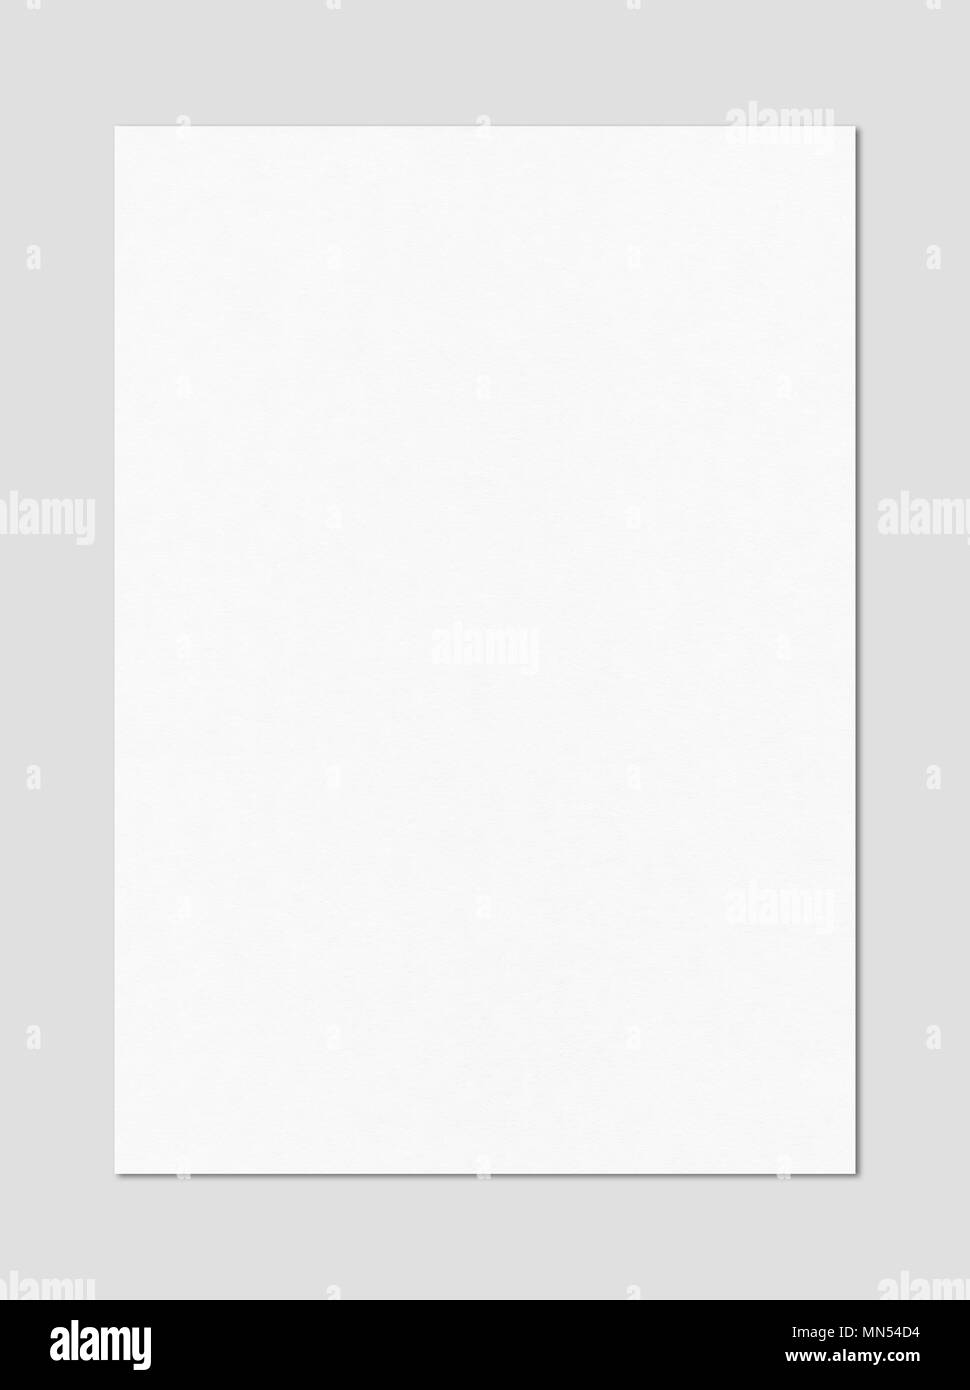 Blank White A4 paper sheet mockup template isolated on grey background  Stock Photo - Alamy